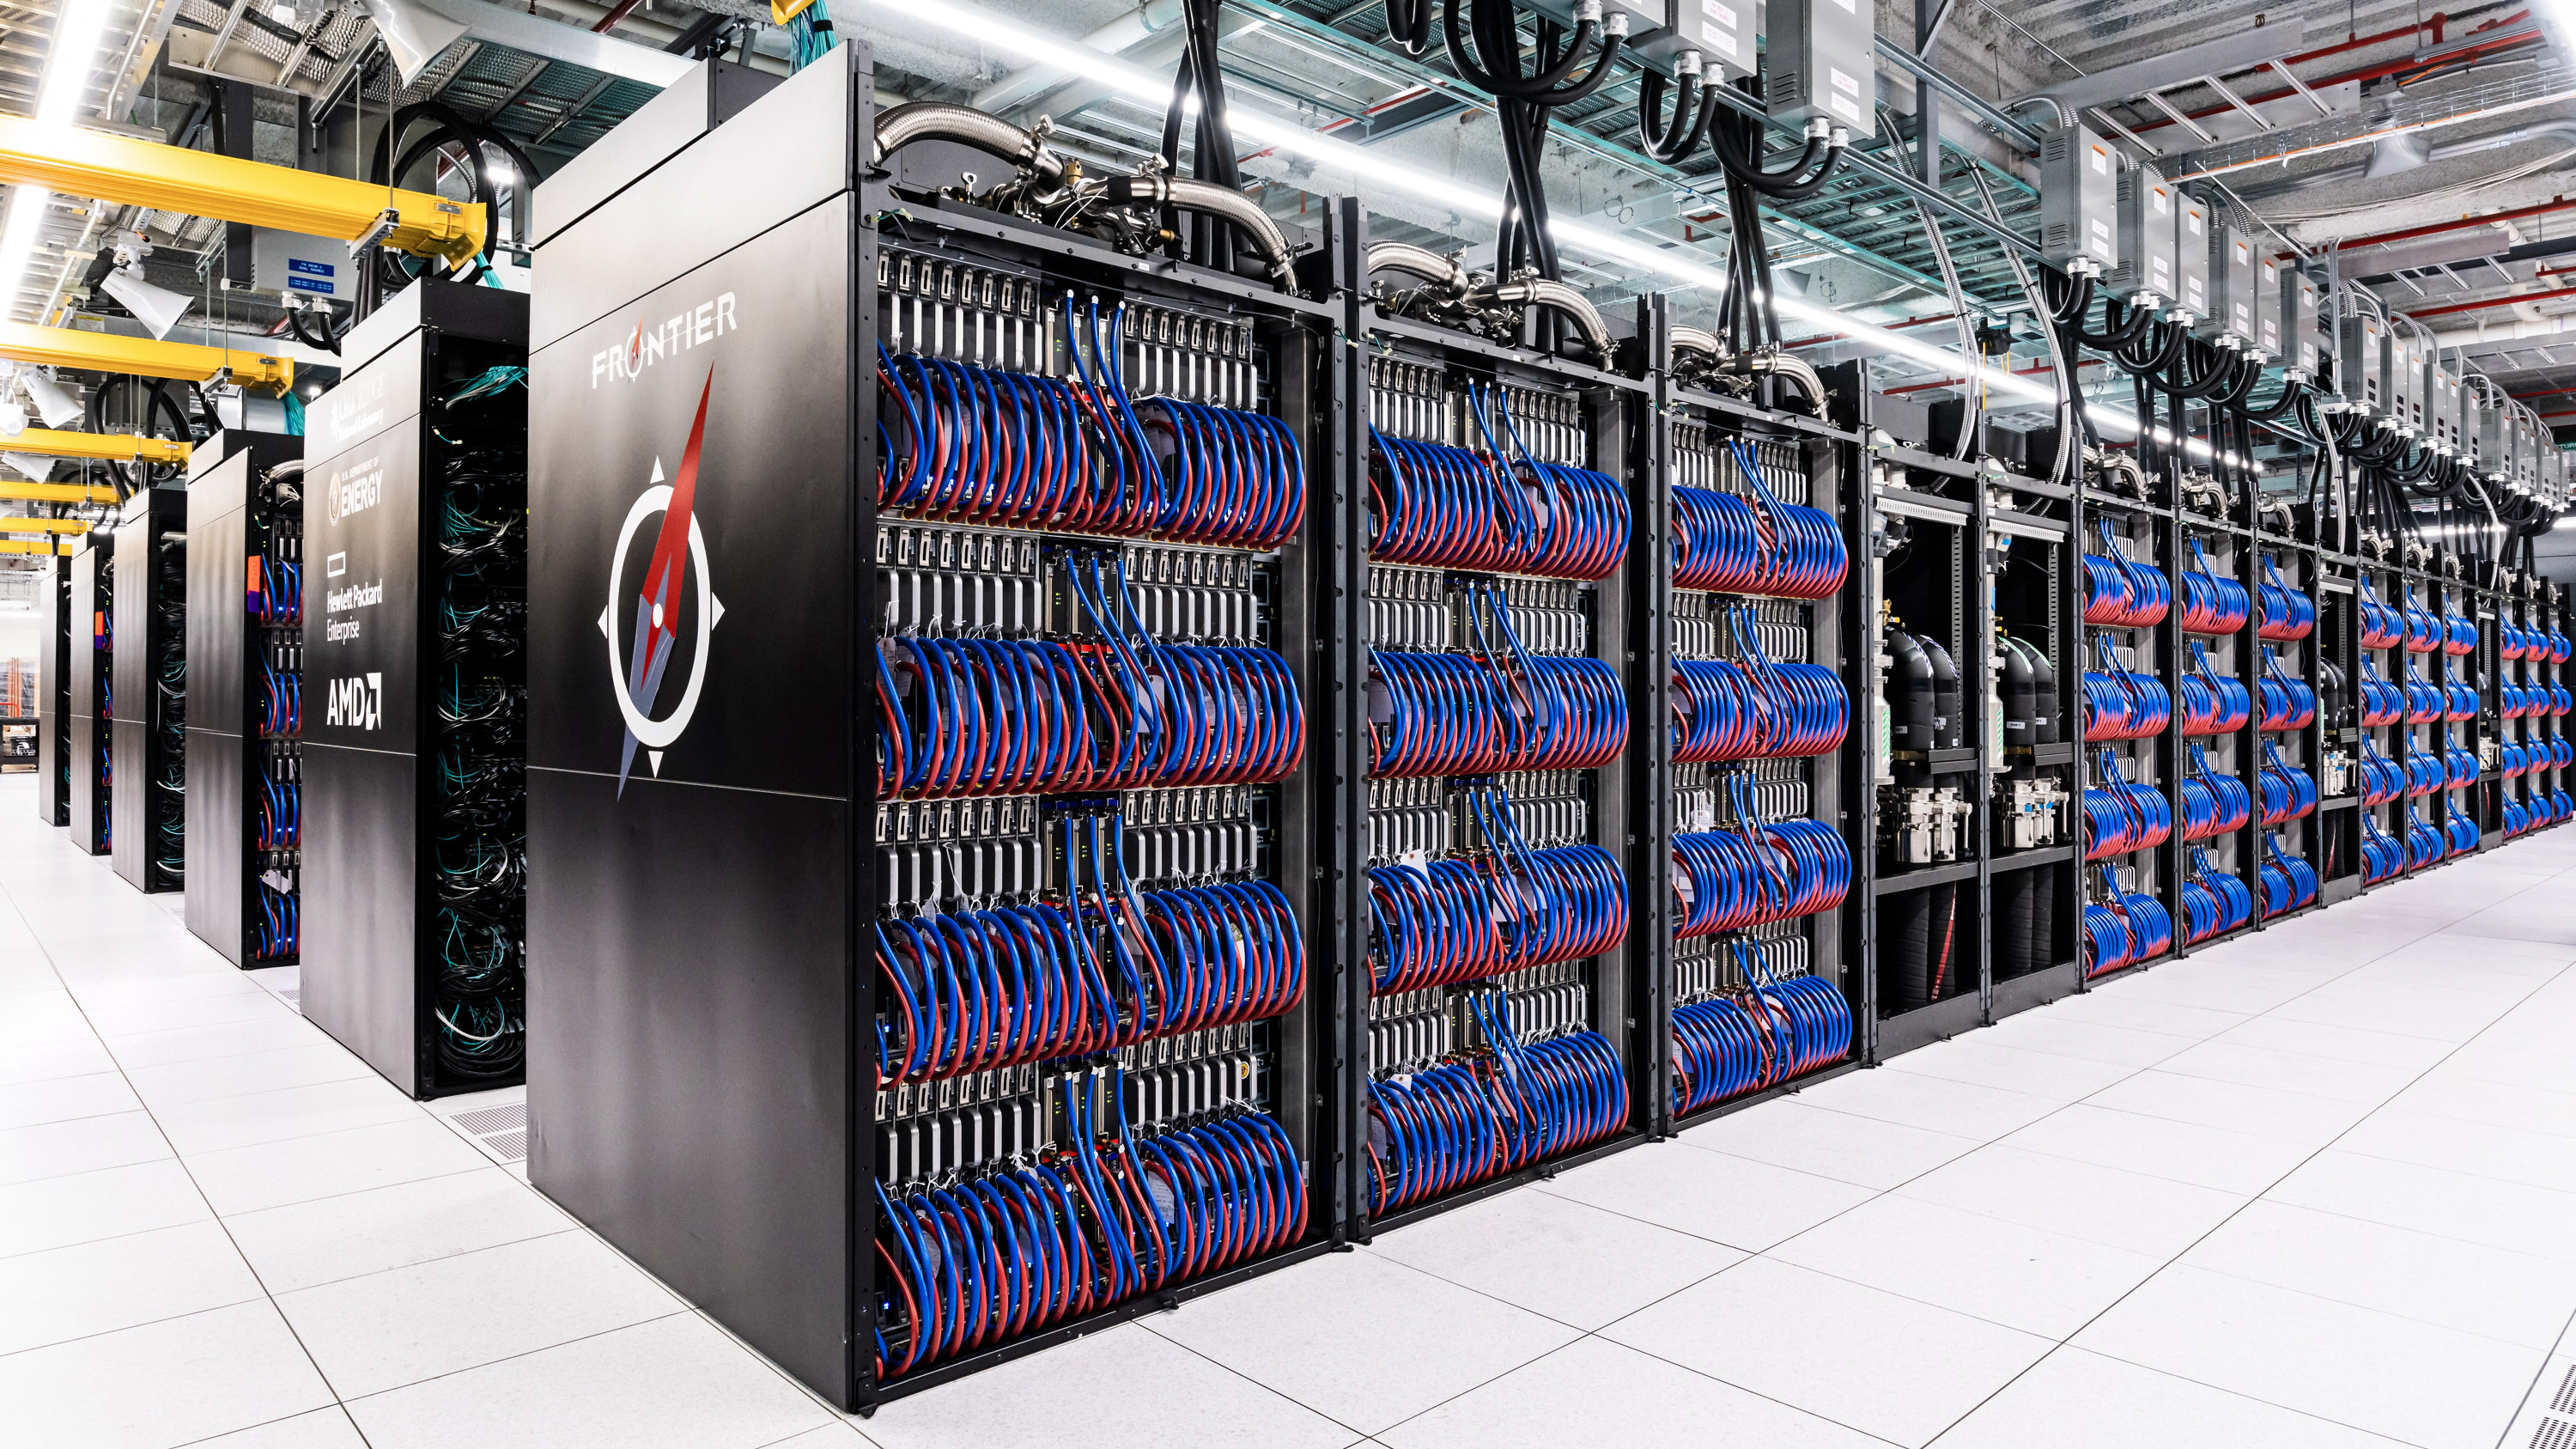 What's next for the world's fastest supercomputers